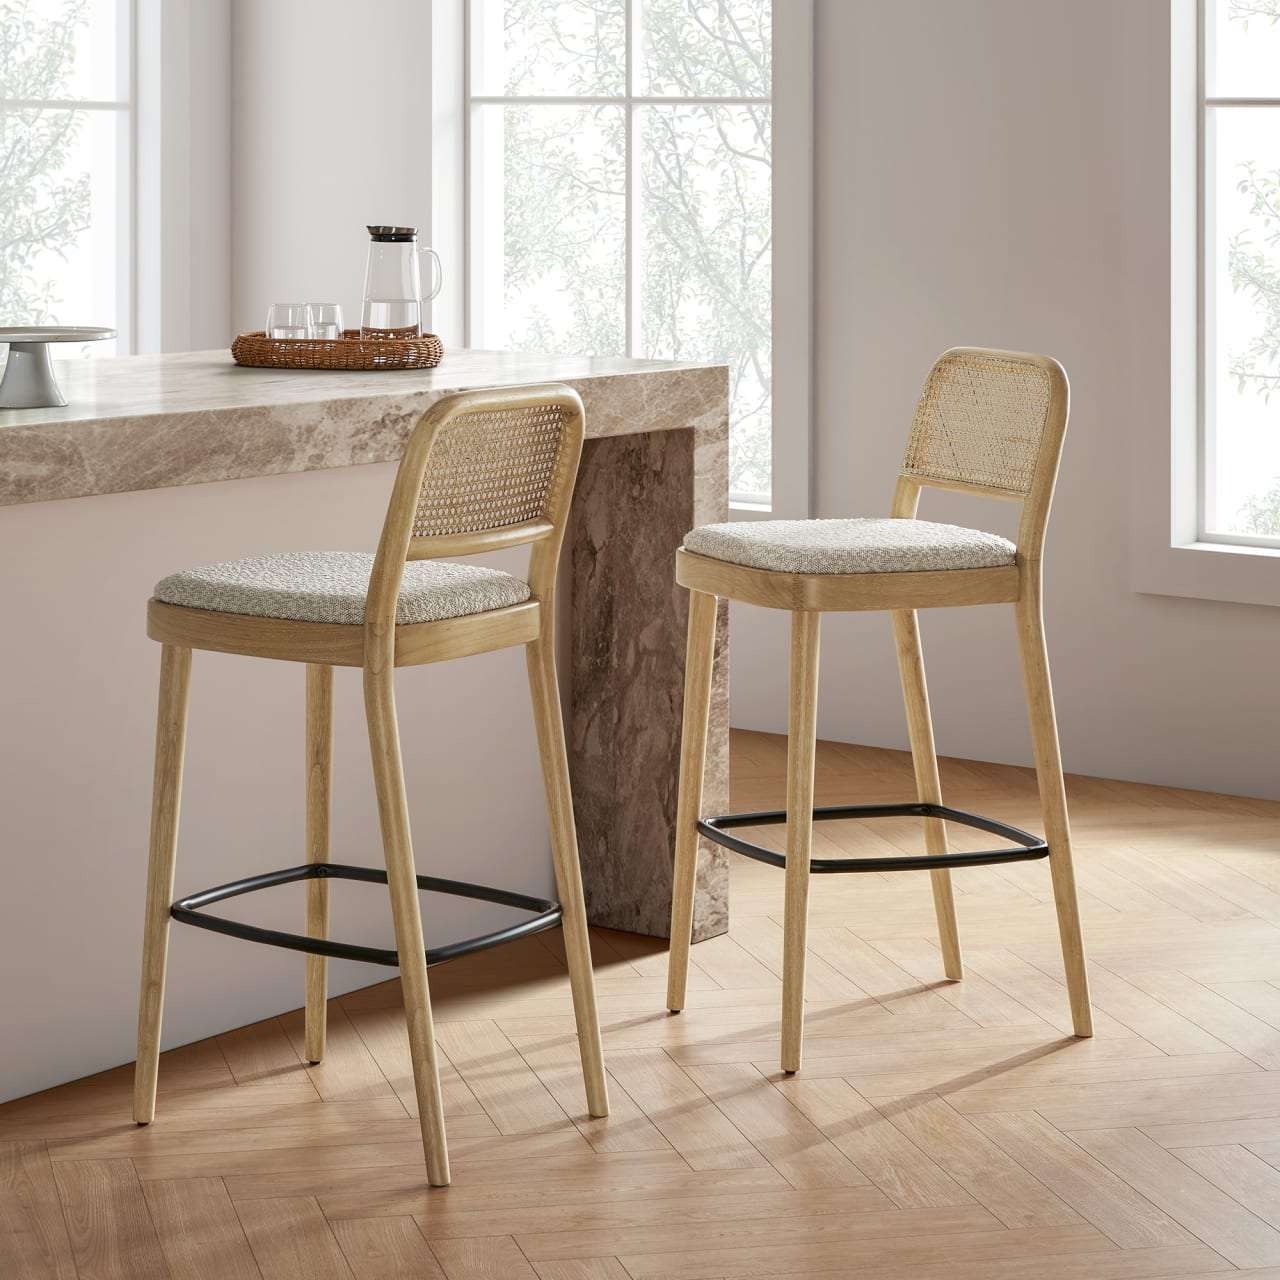 Lassic Cafe Counter Stool